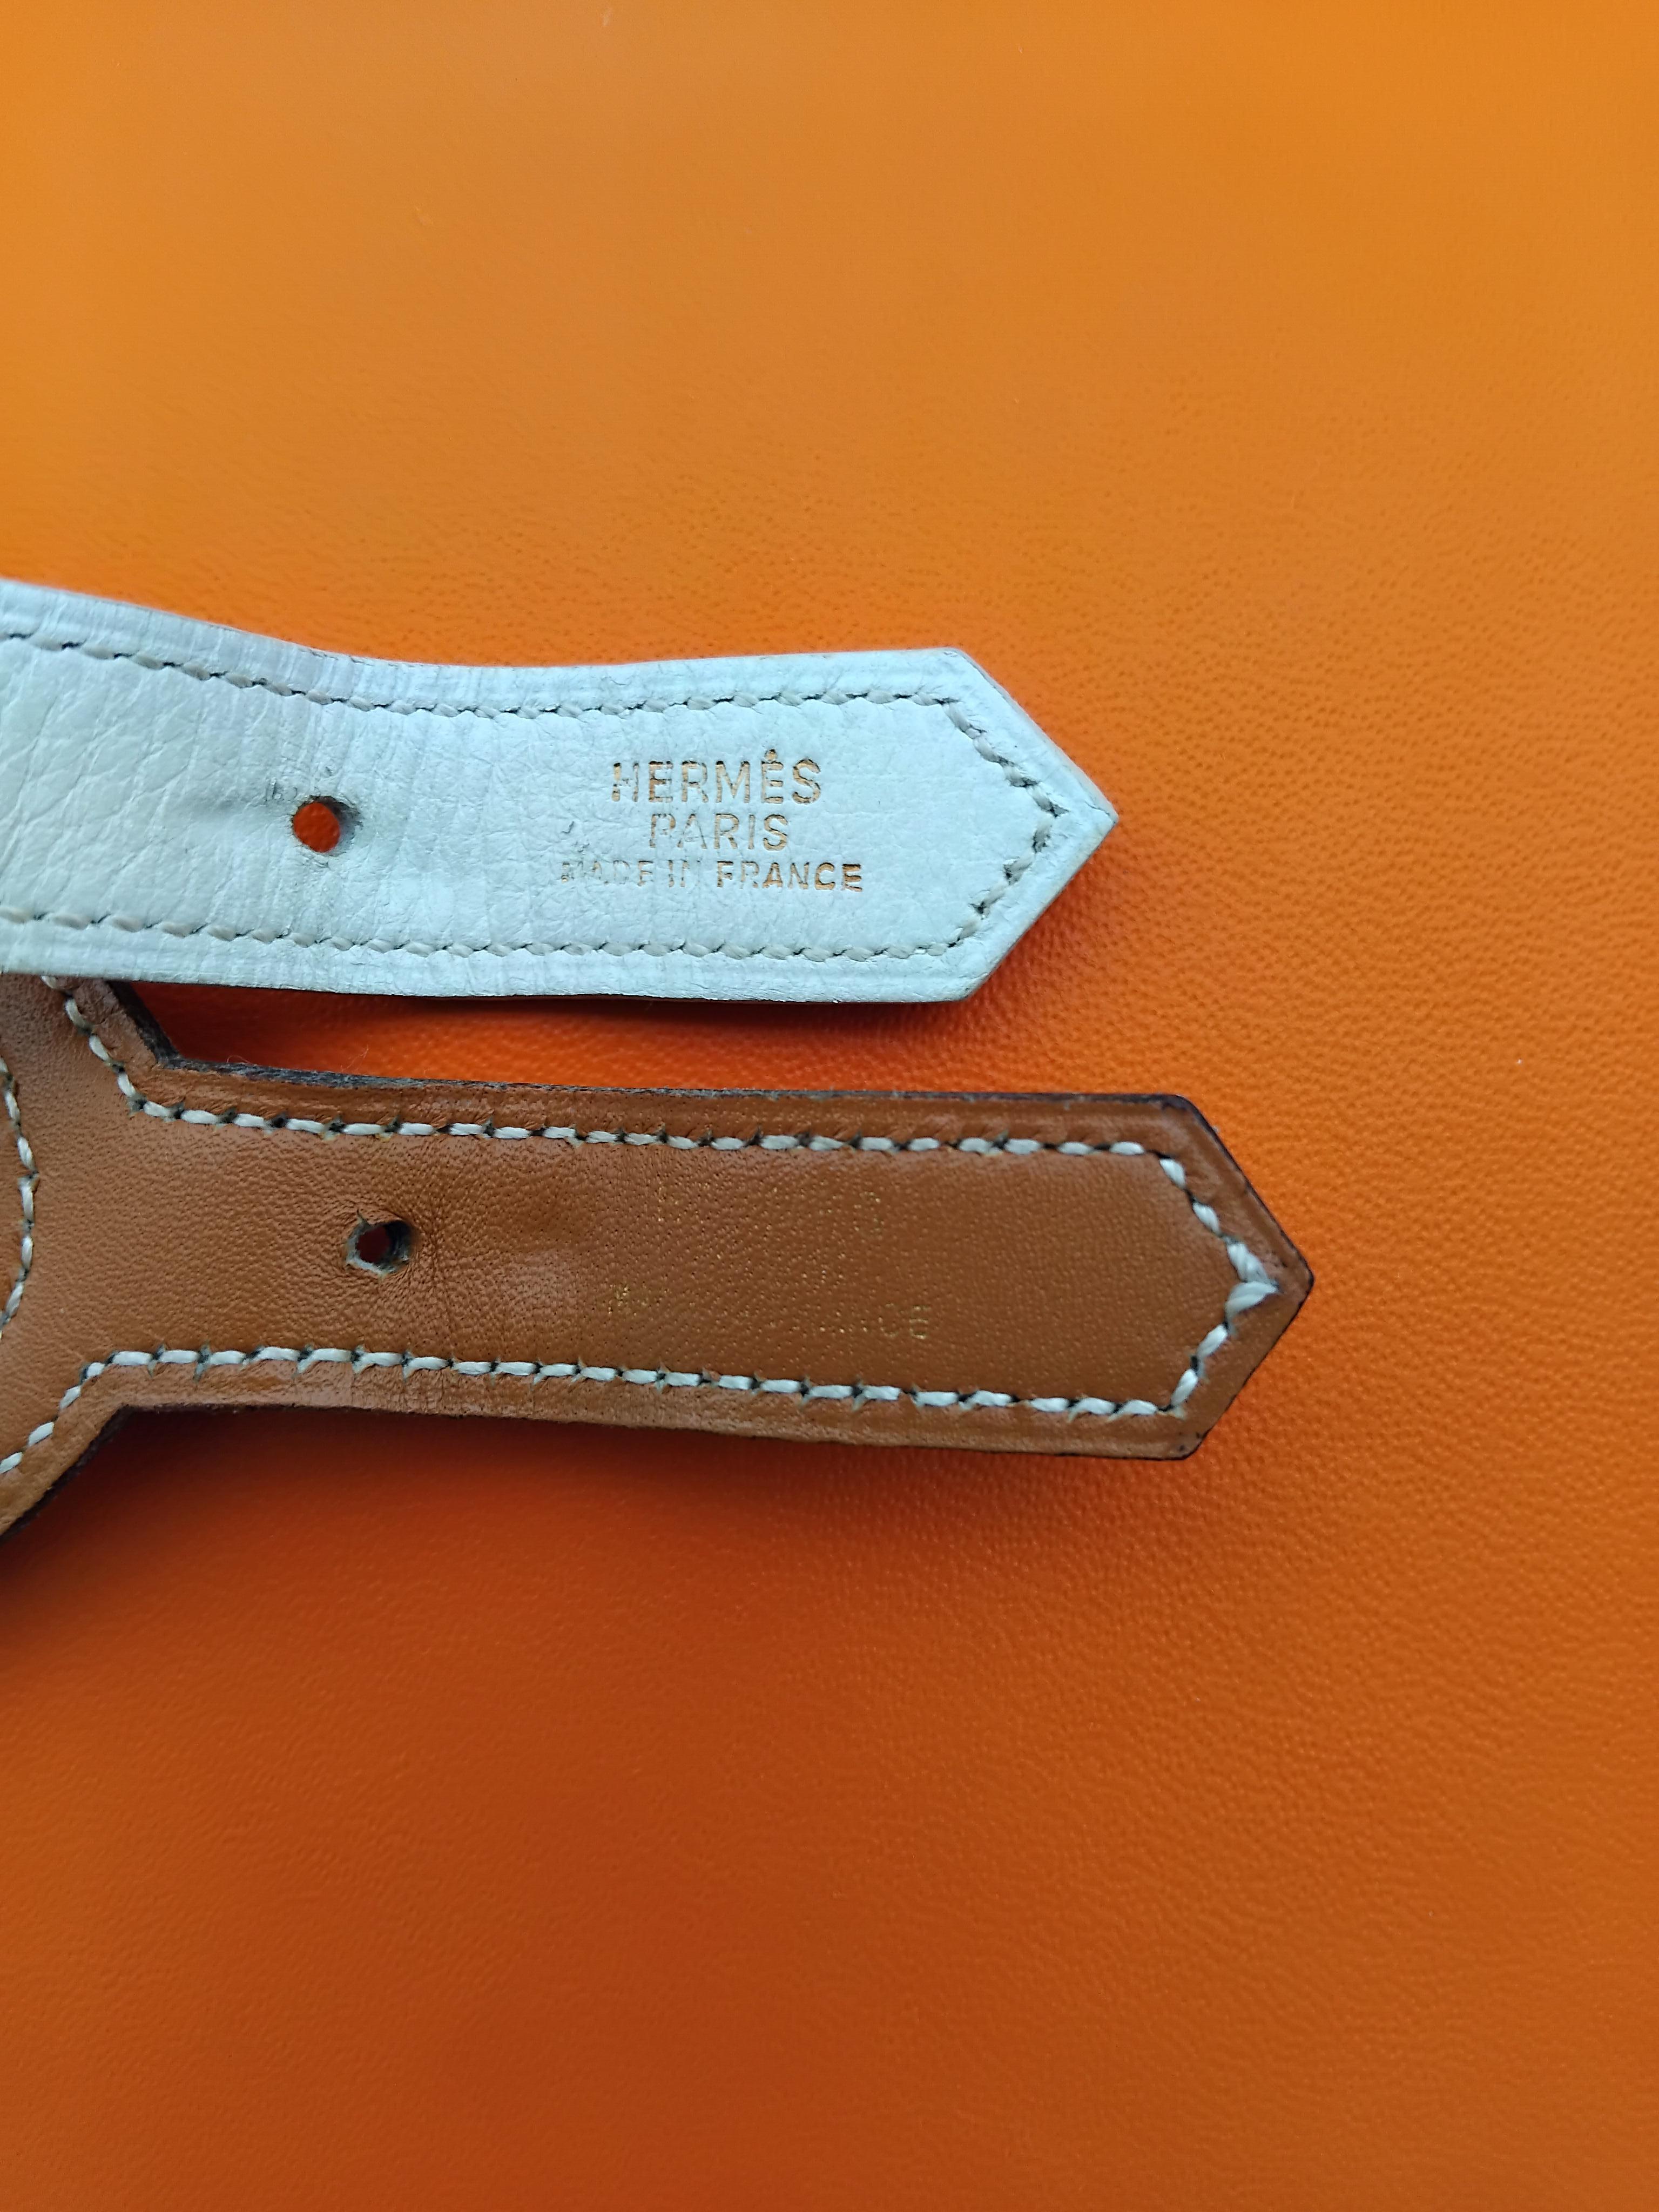 Exceptional Hermès Ornaments for Hermès Skirt Belt Buckles in Toile and Leather For Sale 3